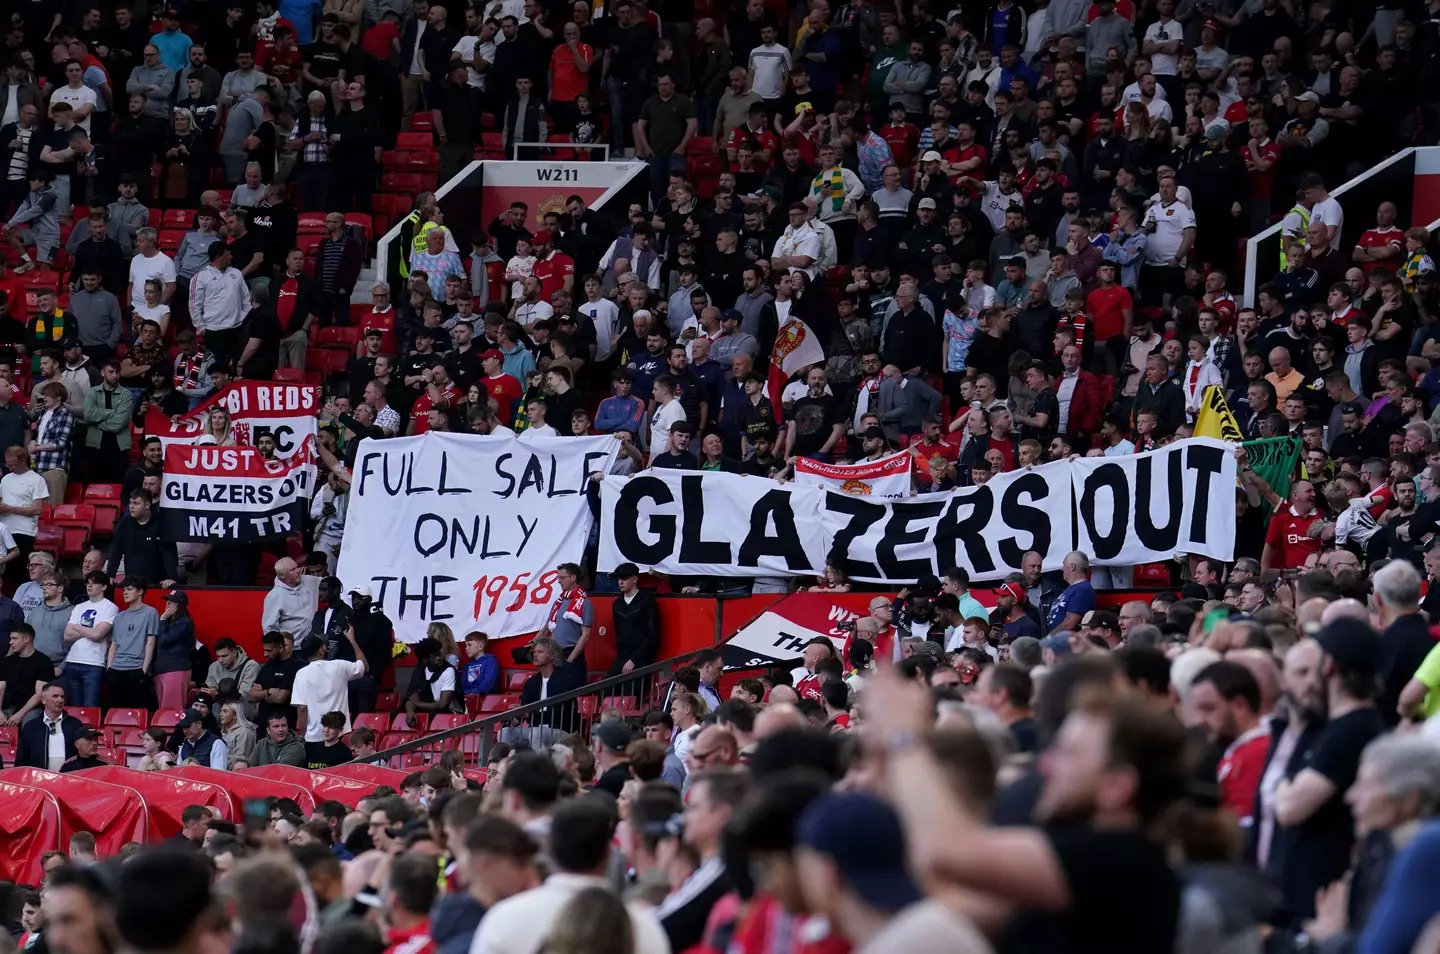 Protests against the Glazers have continued throughout the prolonged sale. Image: Alamy